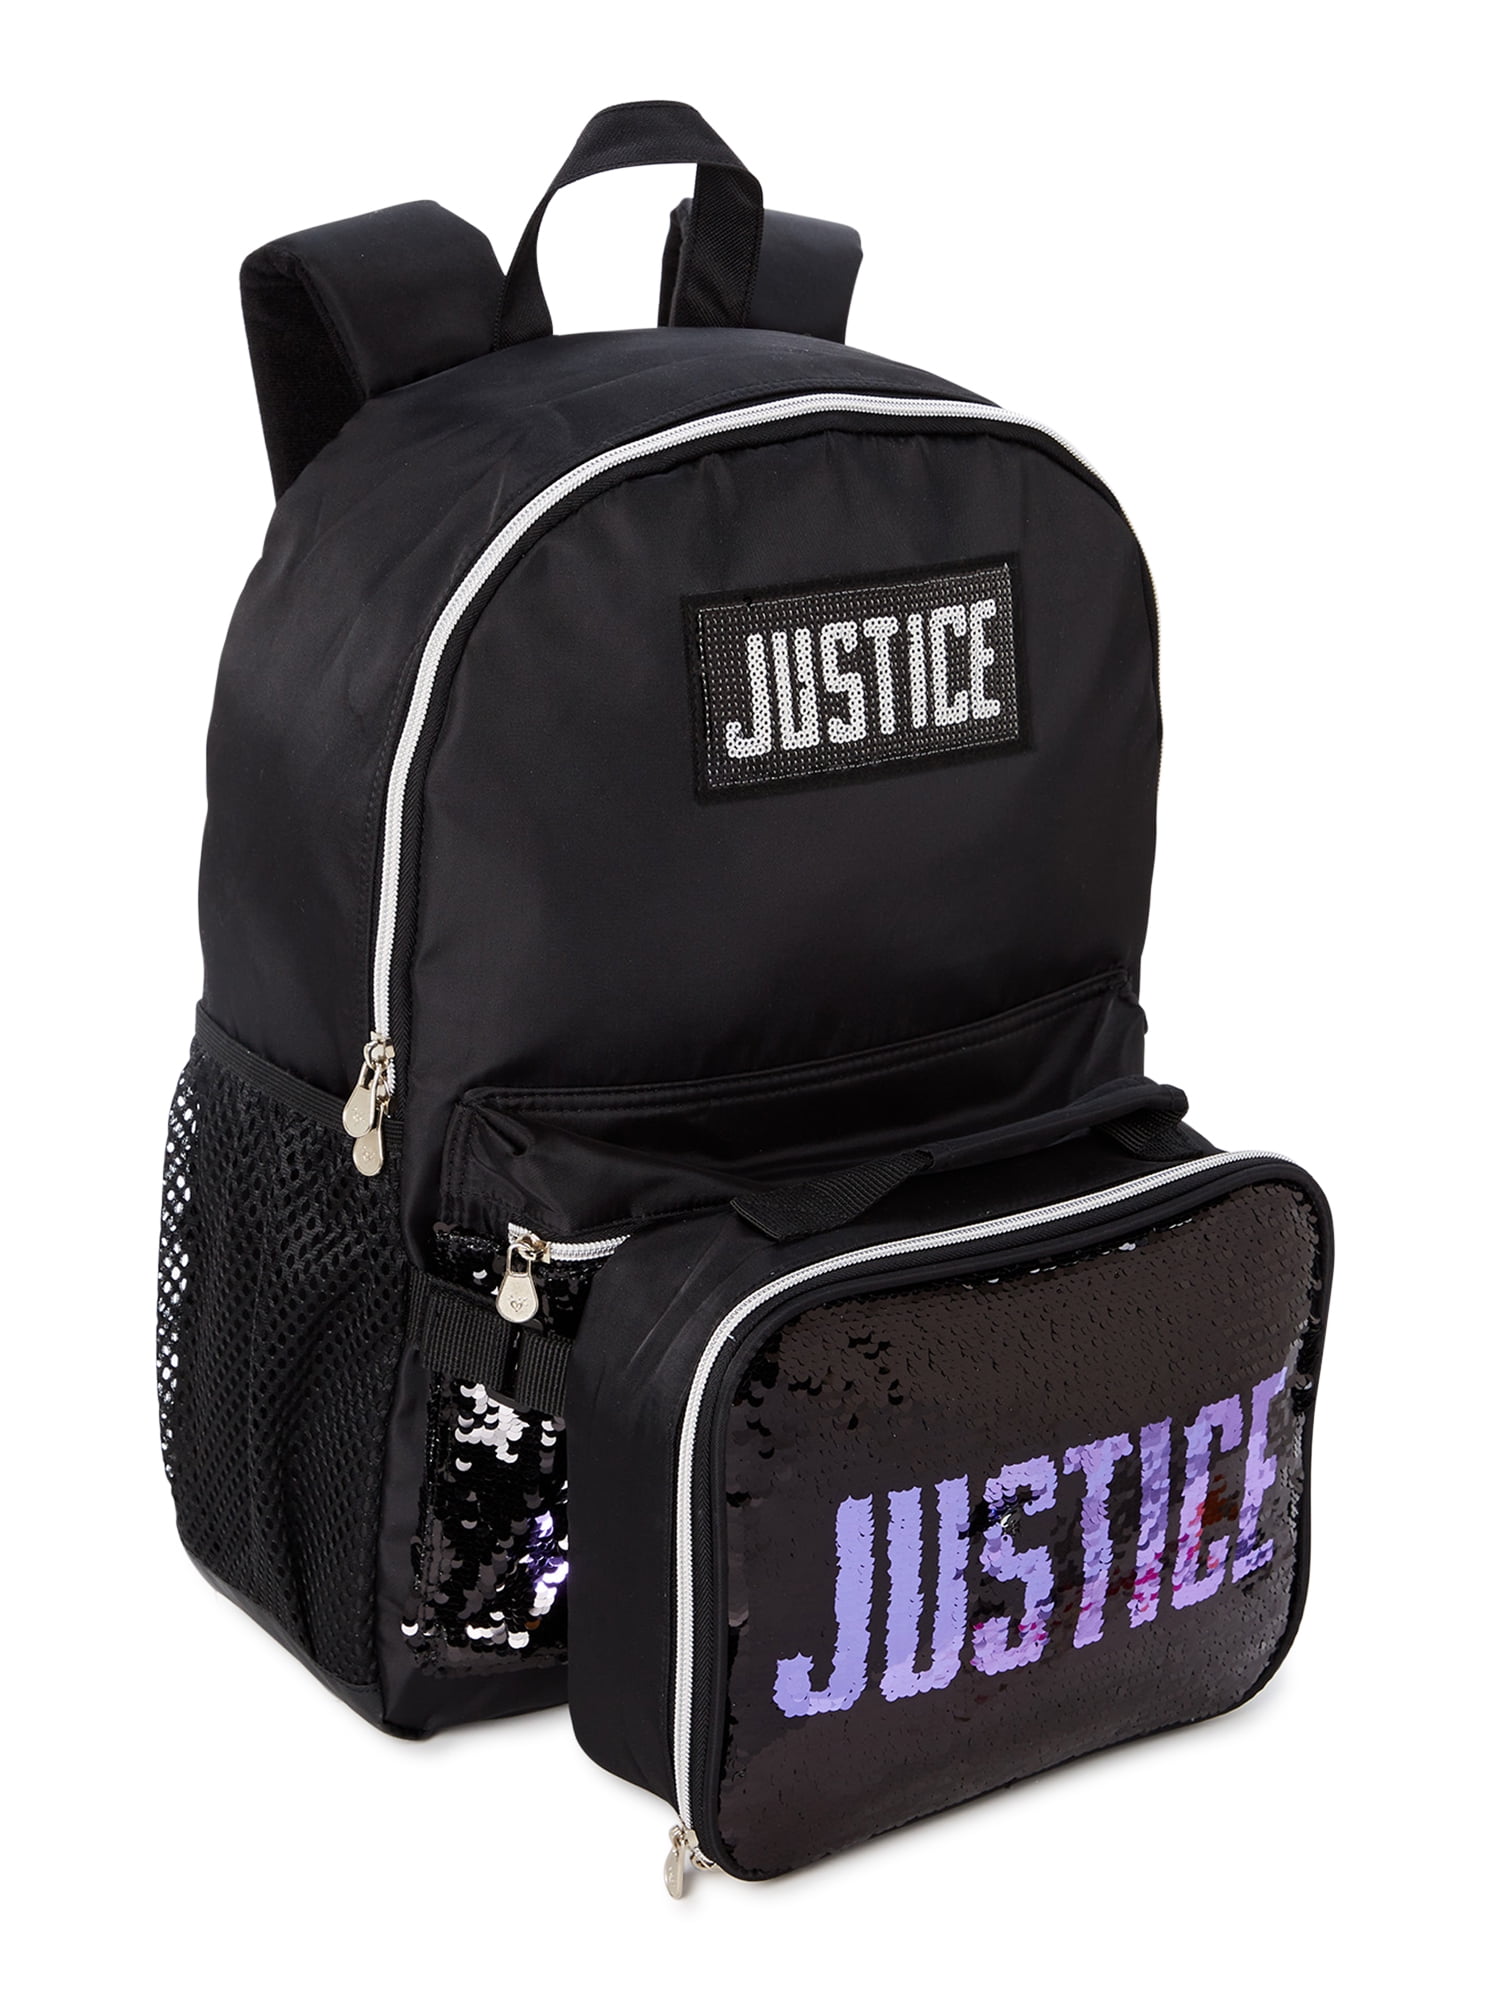 Justice Girl's Quilted Backpack Lunch Tote & Pouch Set - 1 Each